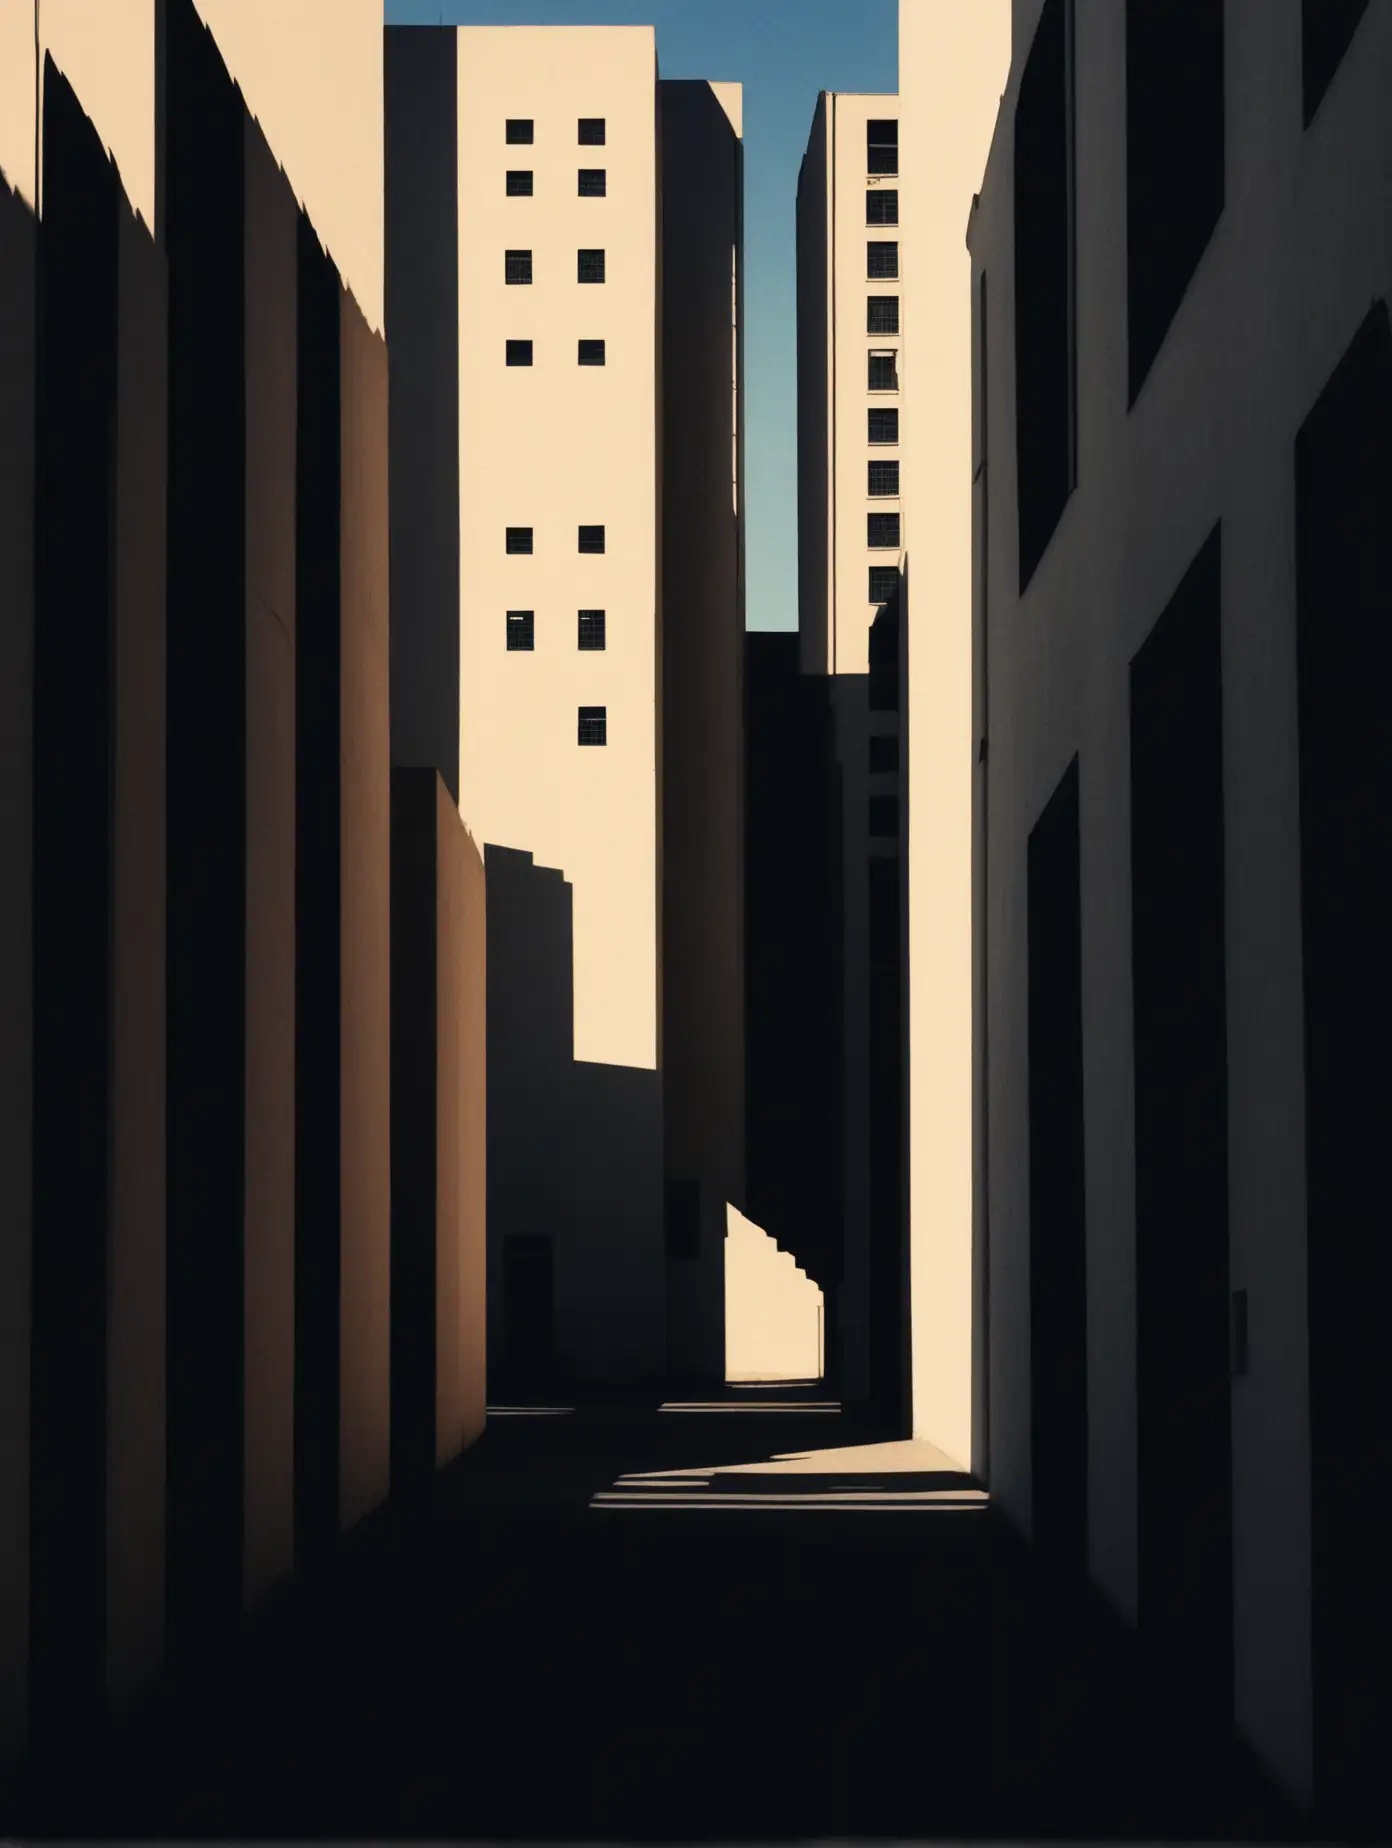 Urban Landscape with Architectural Silhouettes and Shadows